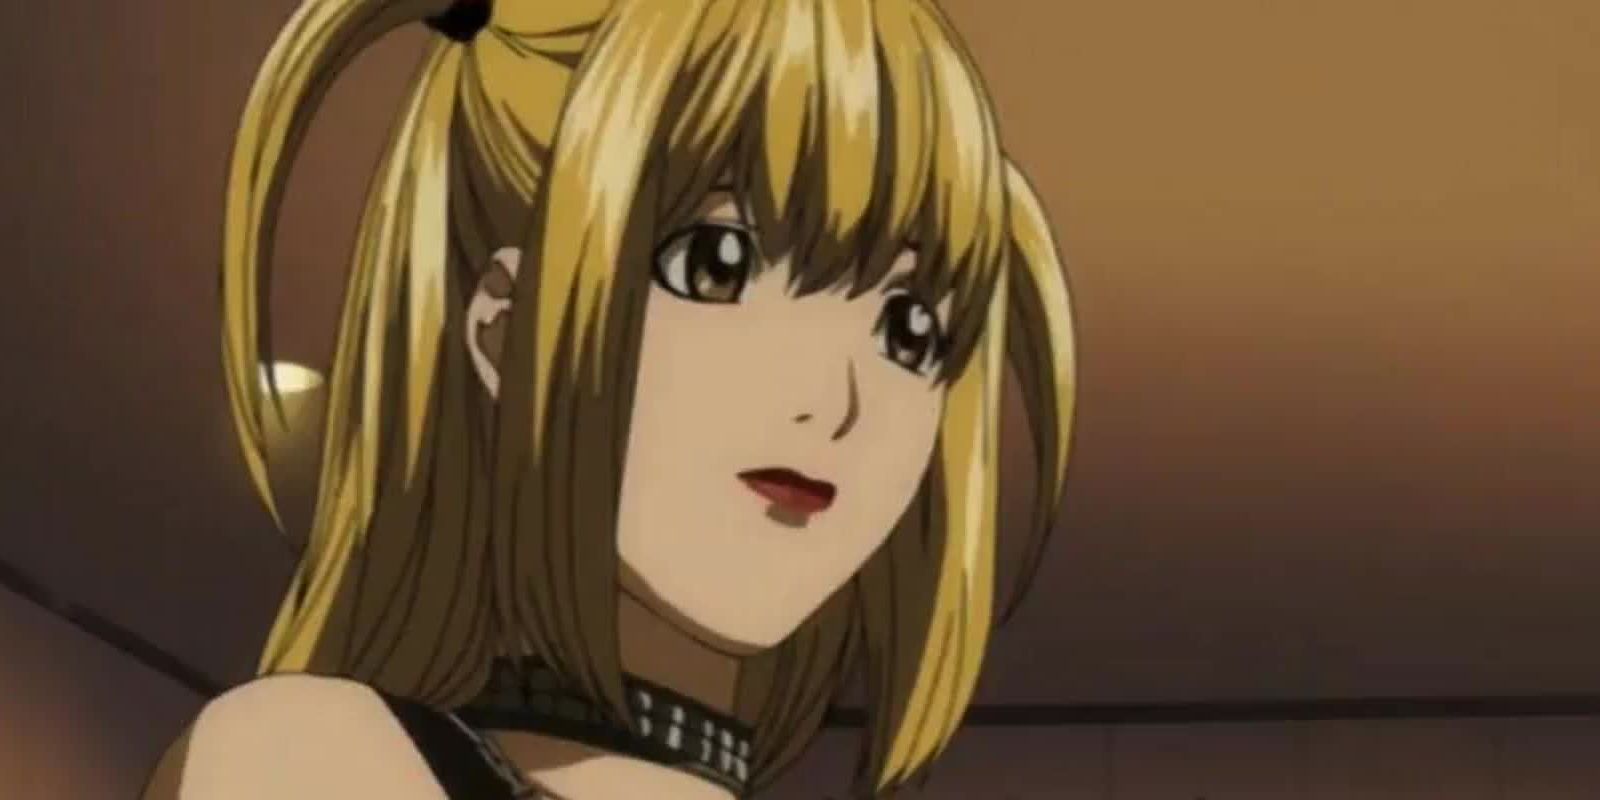 the character misa amane from the anime death note